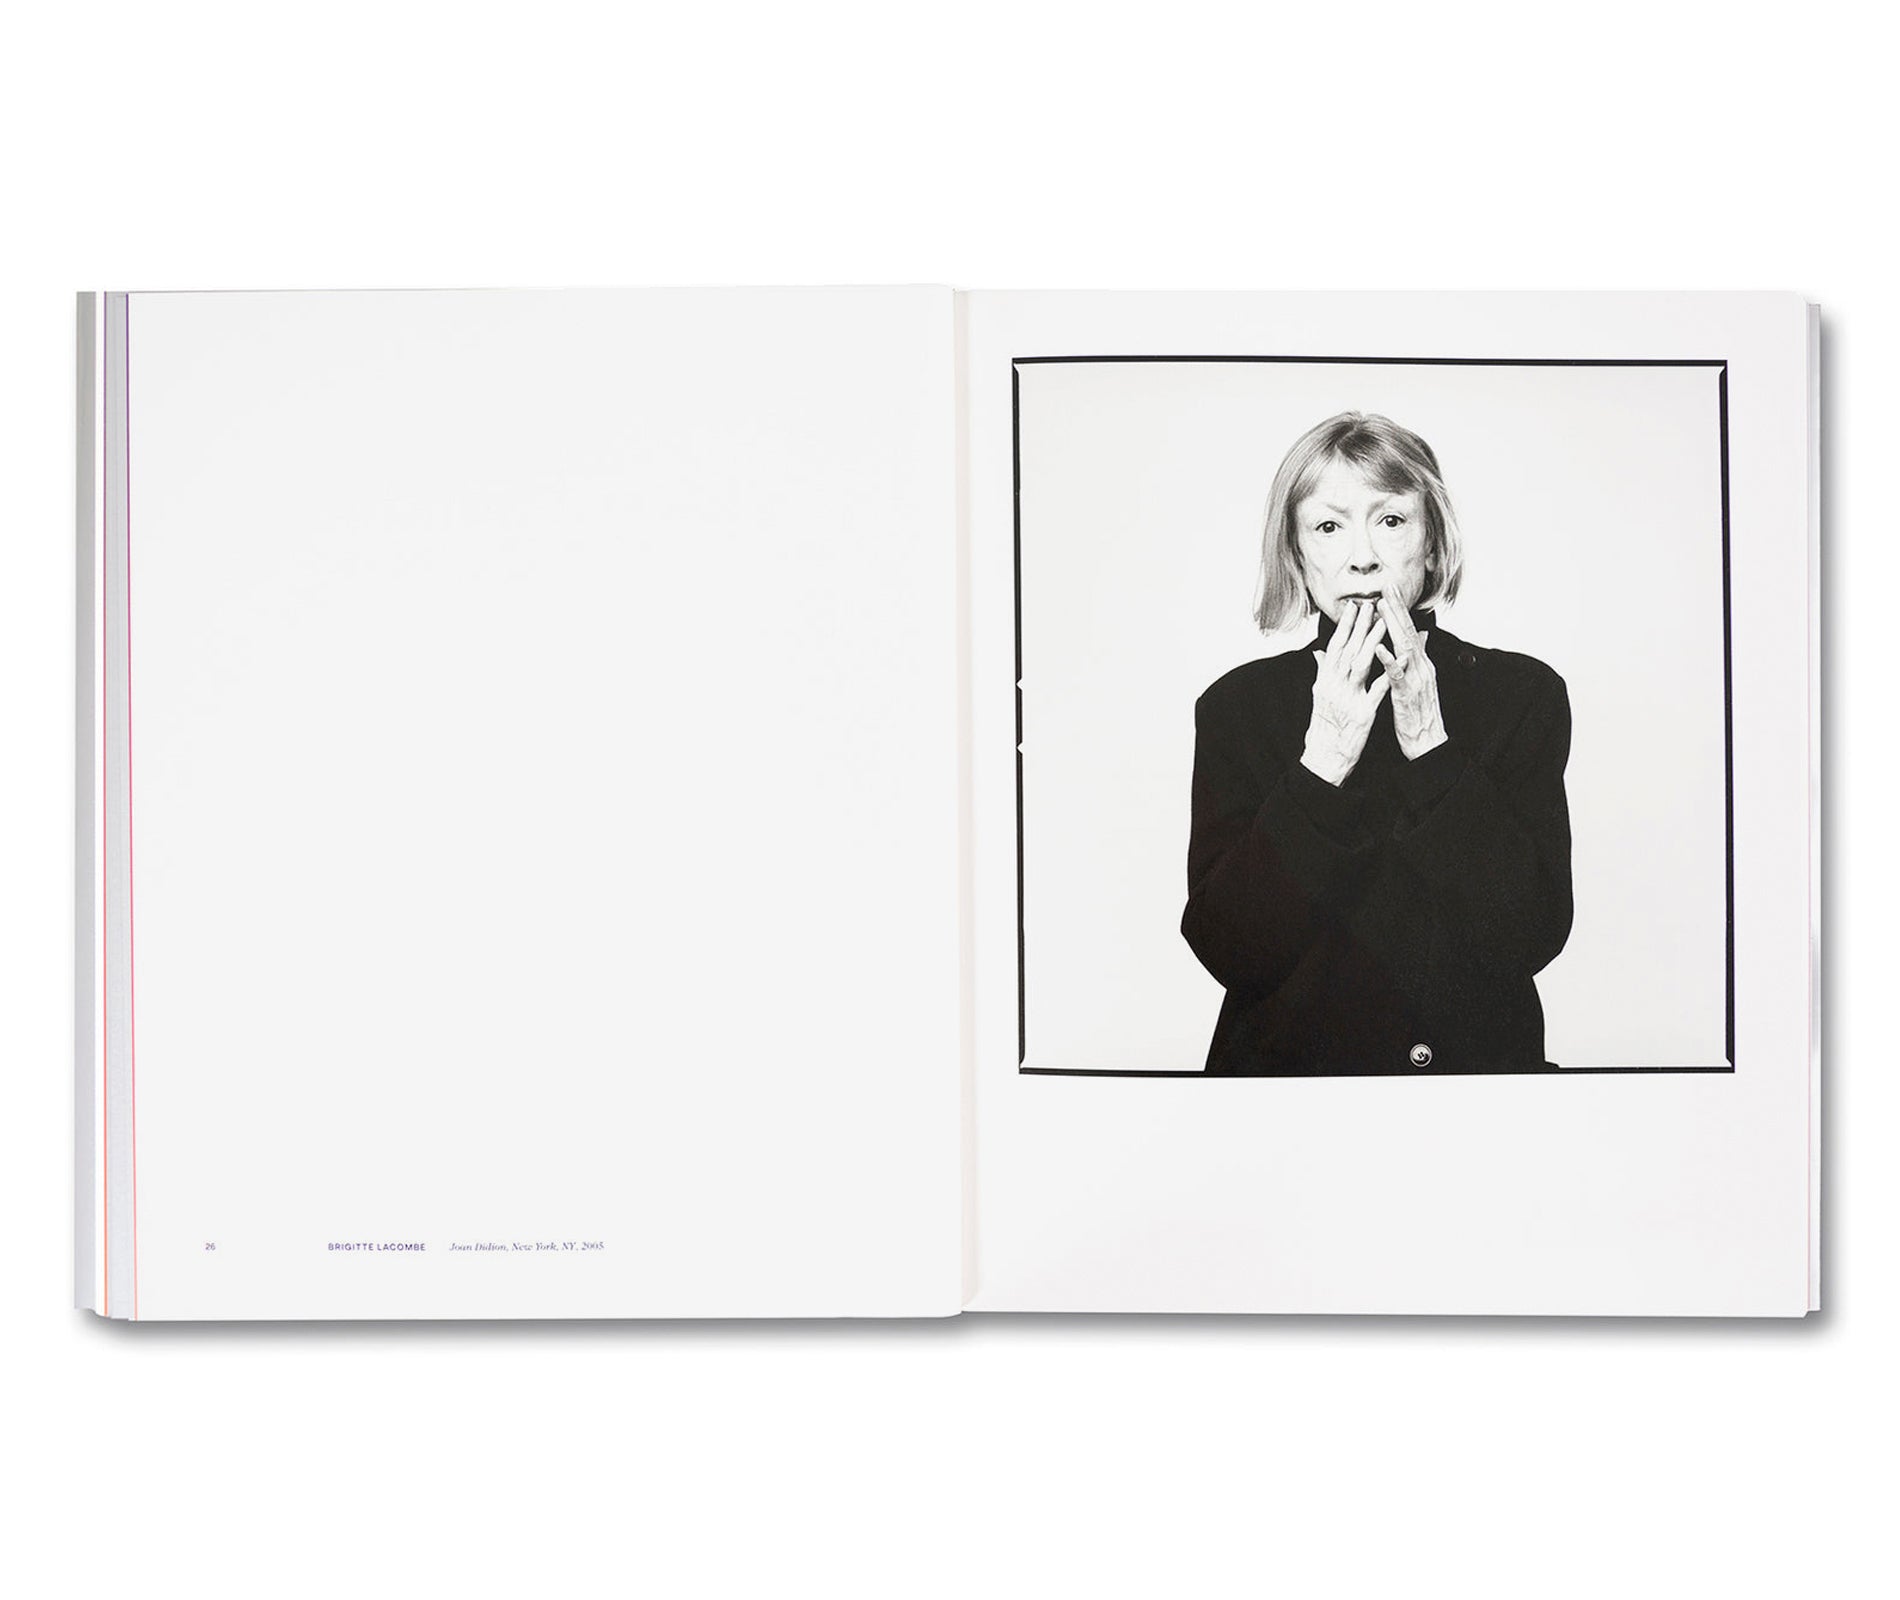 FACE TO FACE: PORTRAITS OF ARTISTS BY TACITA DEAN, BRIGITTE LACOMBE, AND CATHERINE OPIE by Tacita Dean, Brigitte Lacombe, Catherine Opie